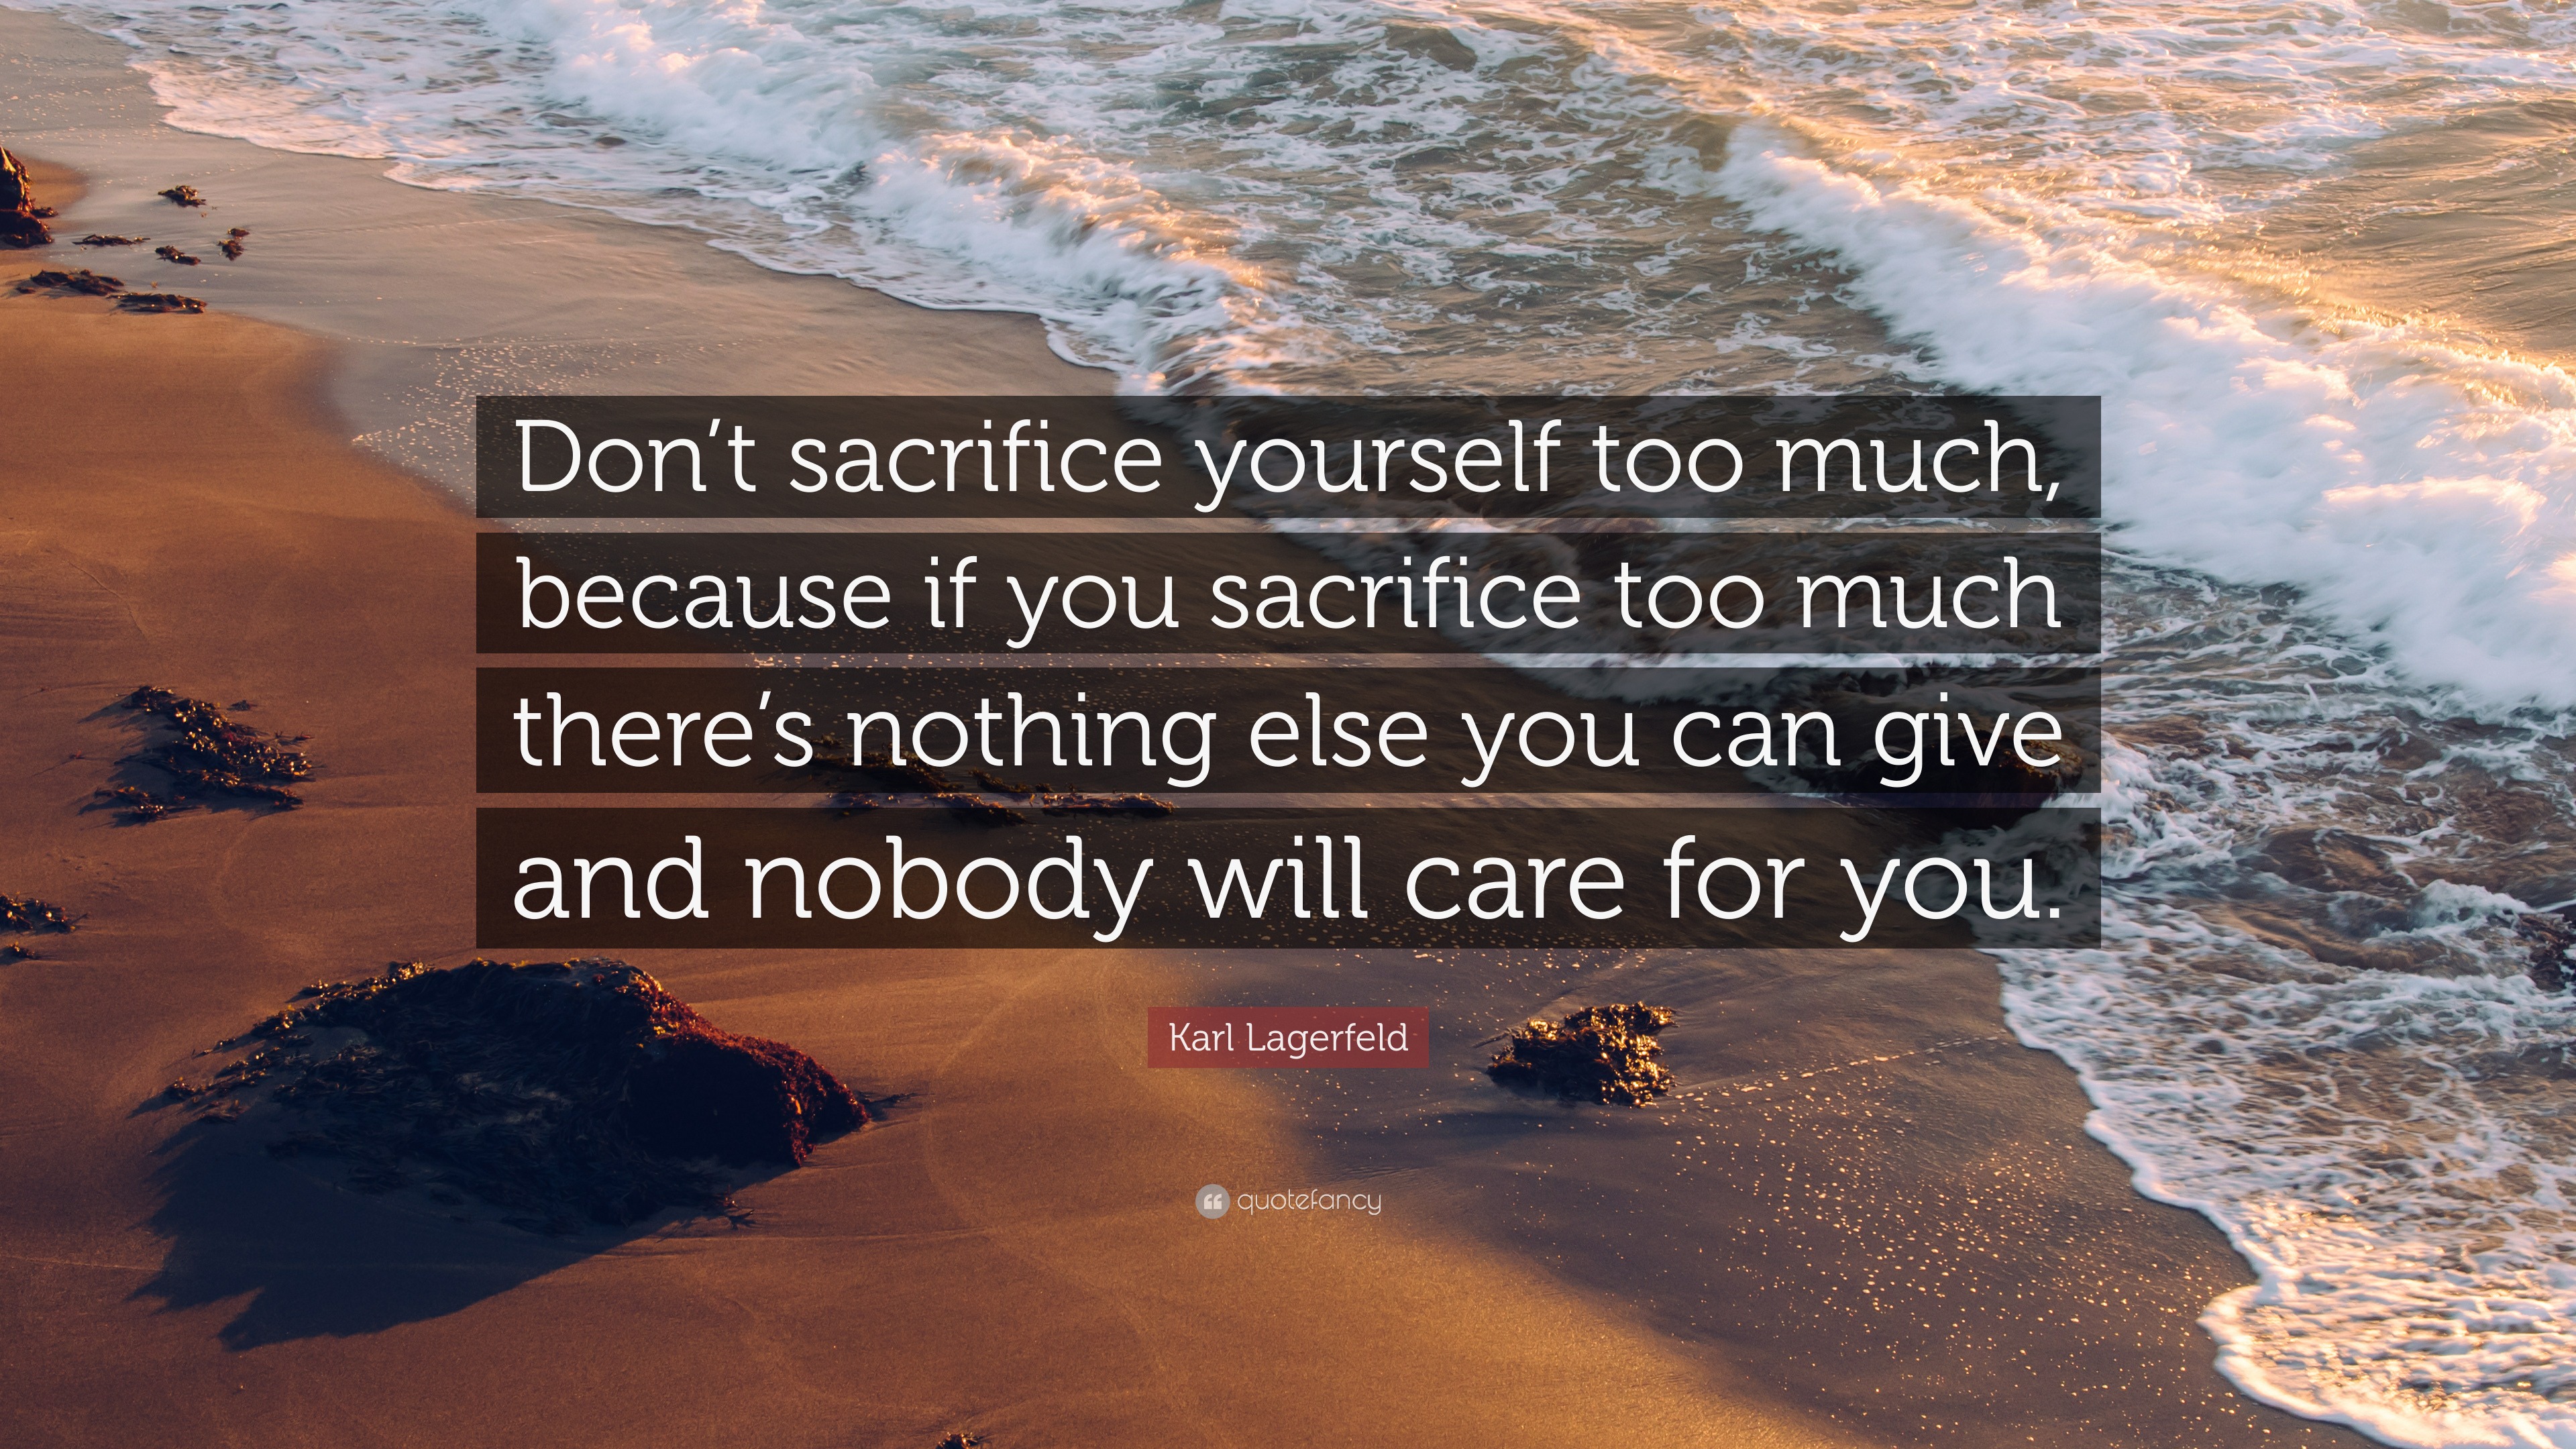 Karl Lagerfeld Quote “Don’t sacrifice yourself too much